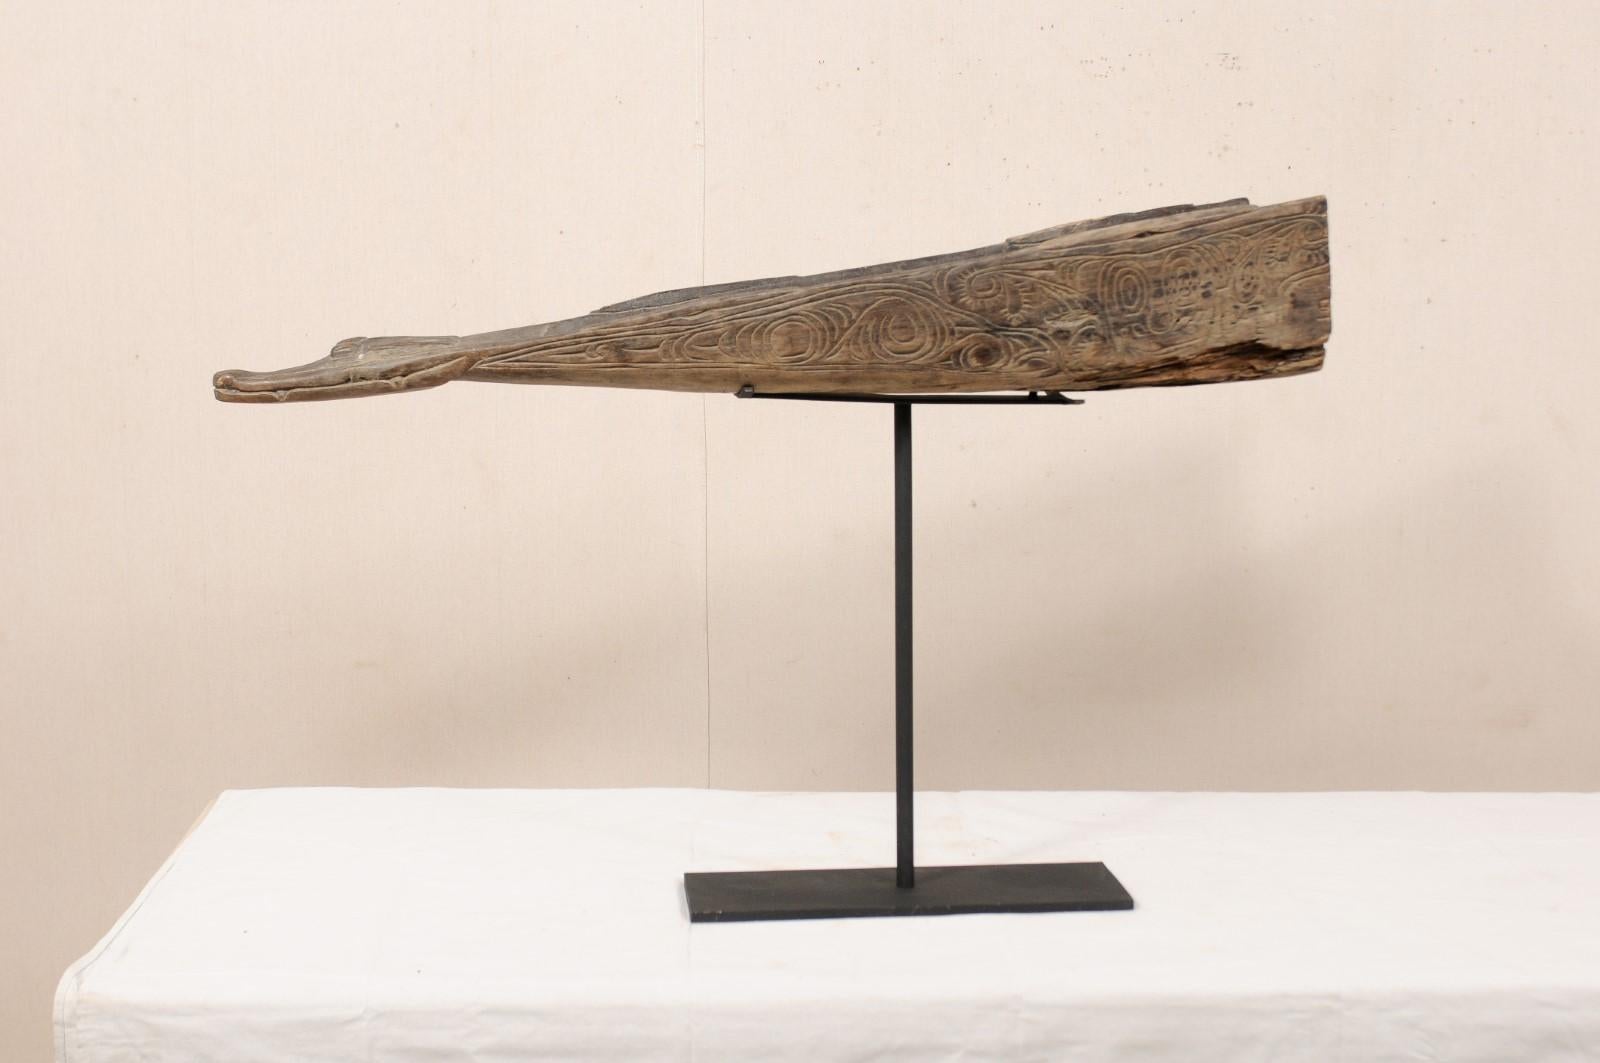 Hand-Carved Carved Wood Crocodile Boat Prow For Sale